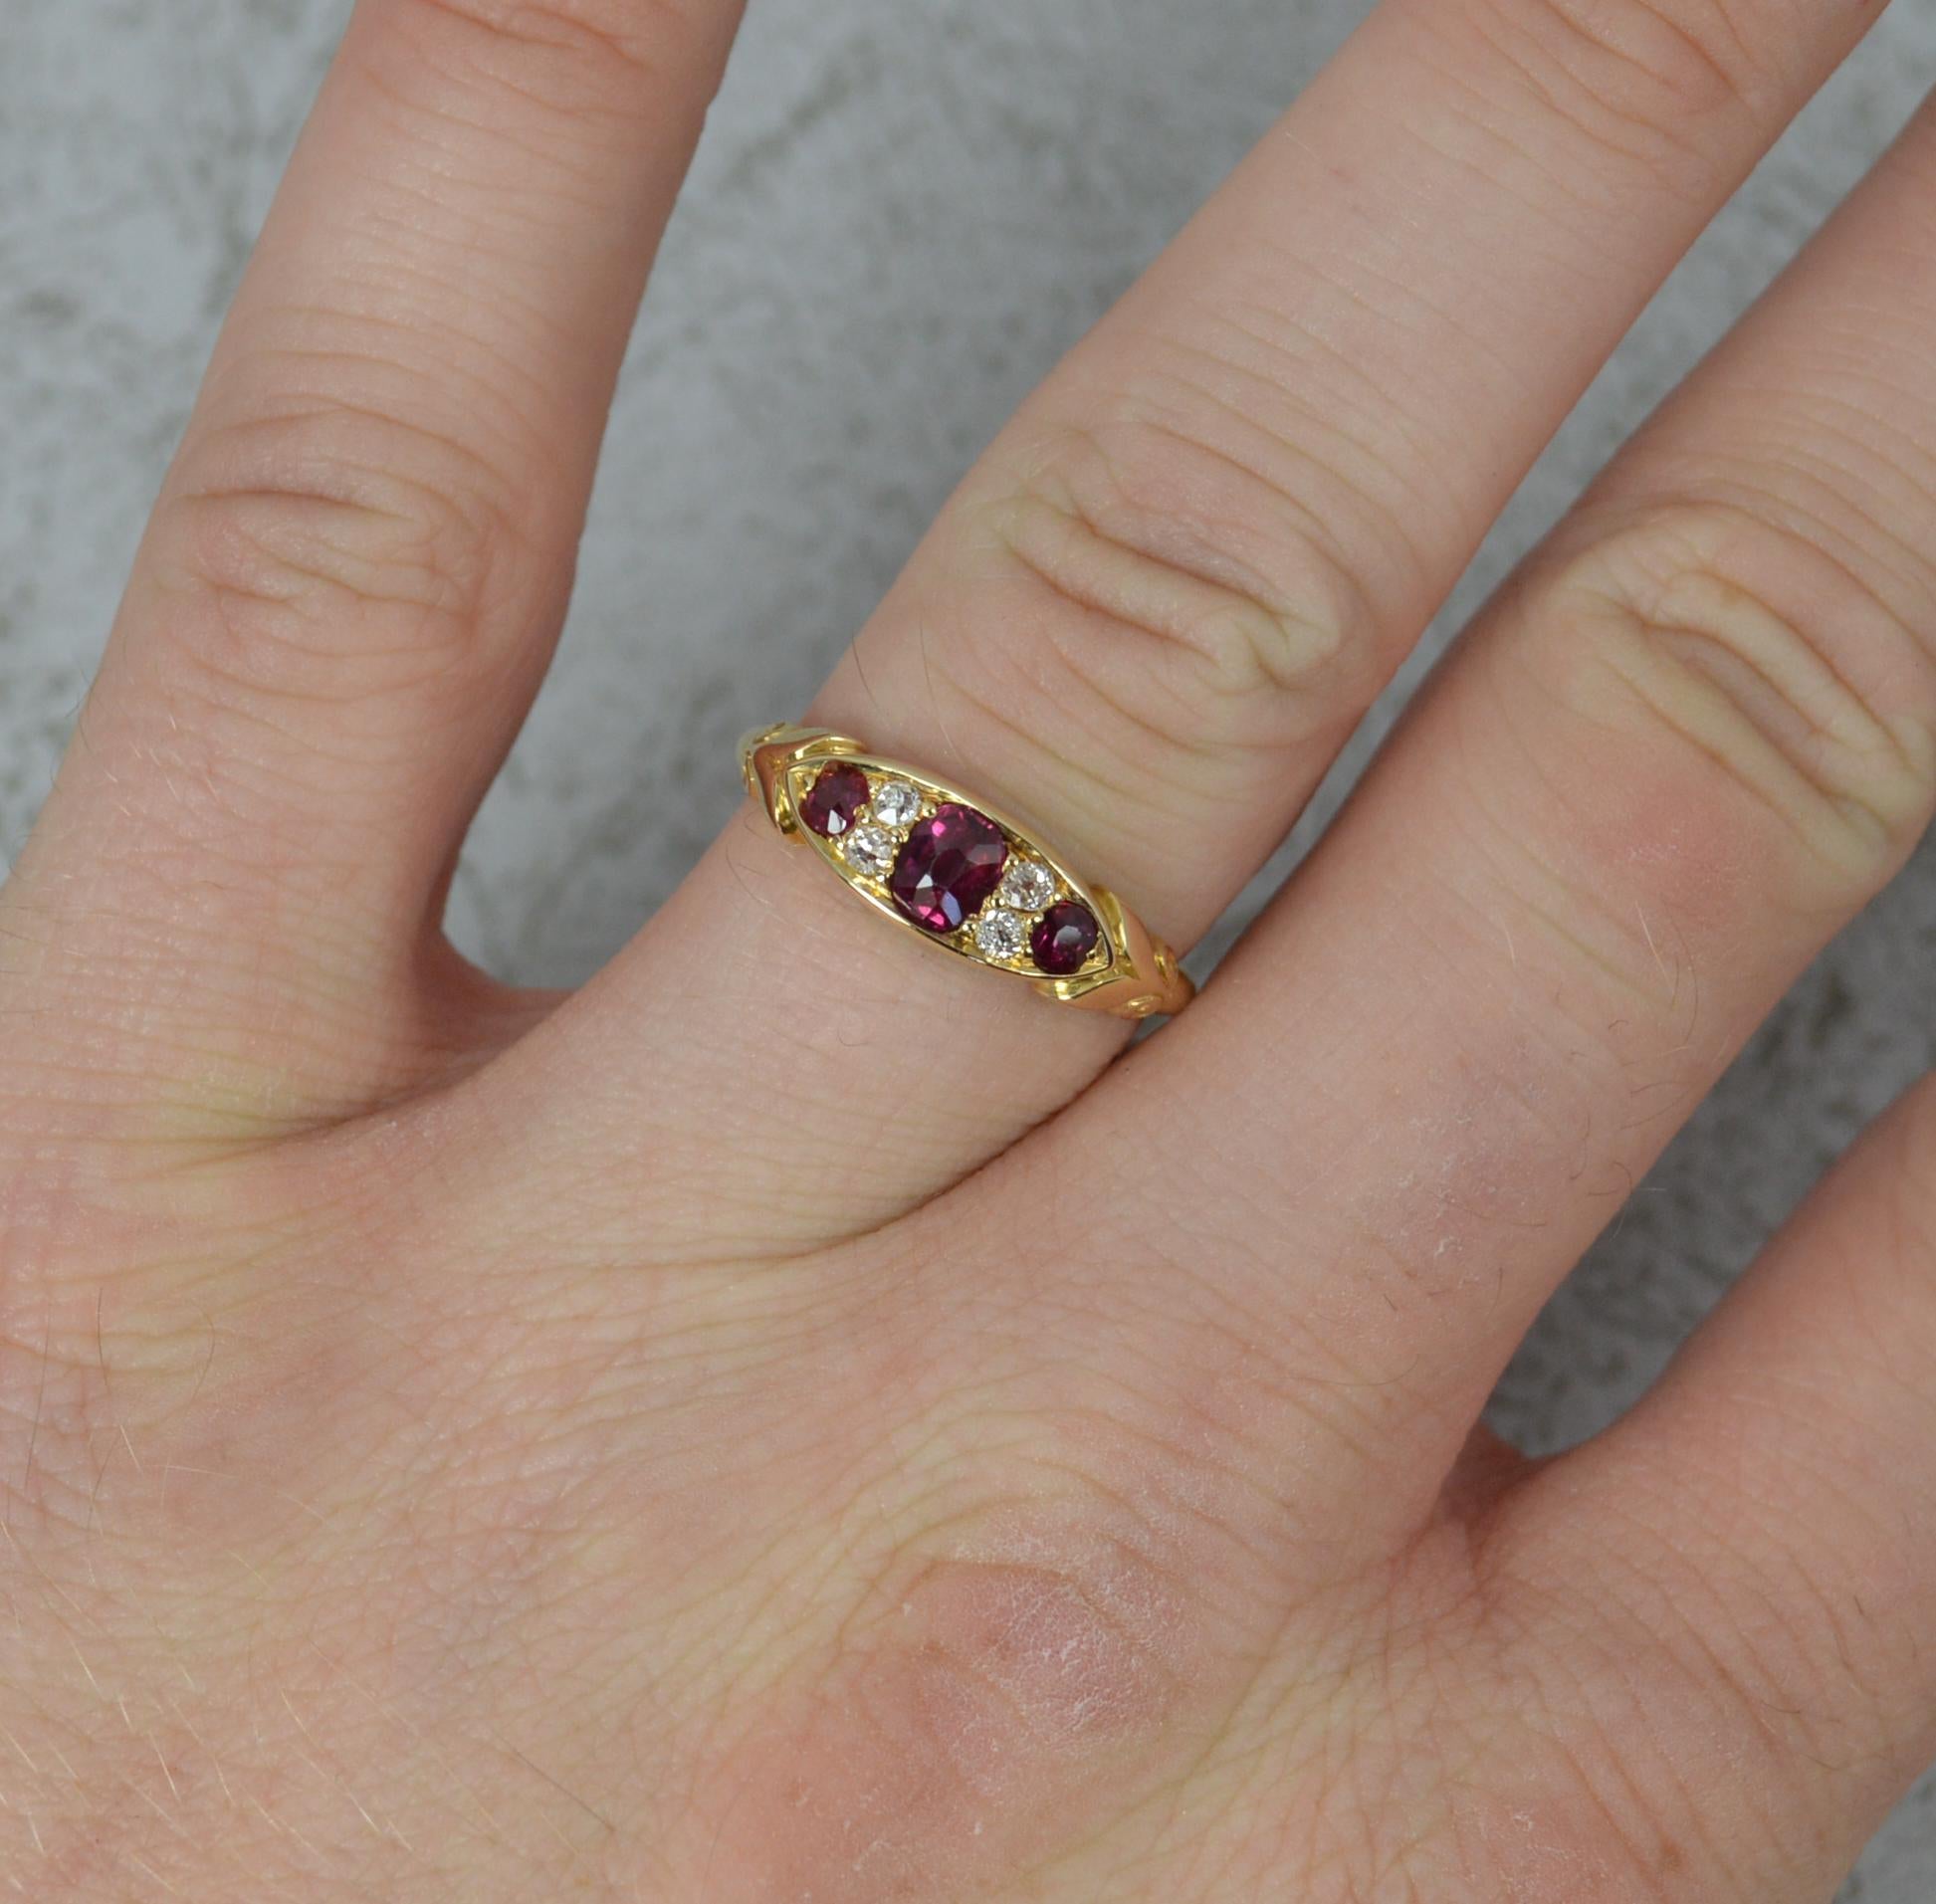 A superb Ruby and Diamond ring, circa 1900.
18 carat yellow gold example.
A boat shape cluster ring. Comprising of three very clean, deep, vivid red ruby stones with pairs of old cut diamonds in between each.
14.1mm x 5.7mm cluster head. Protruding